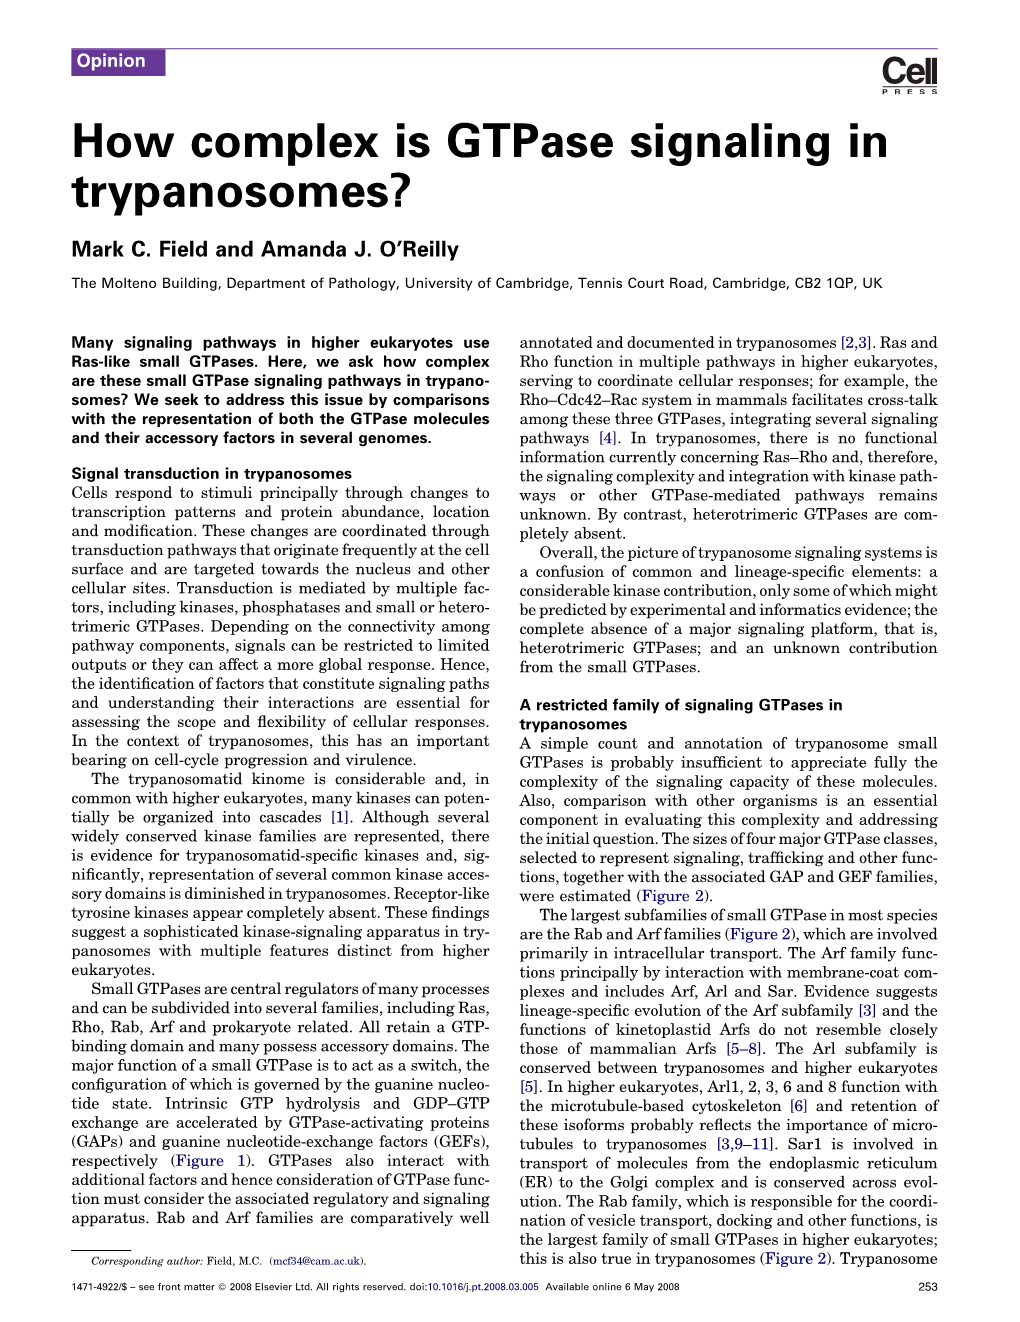 How Complex Is Gtpase Signaling in Trypanosomes?